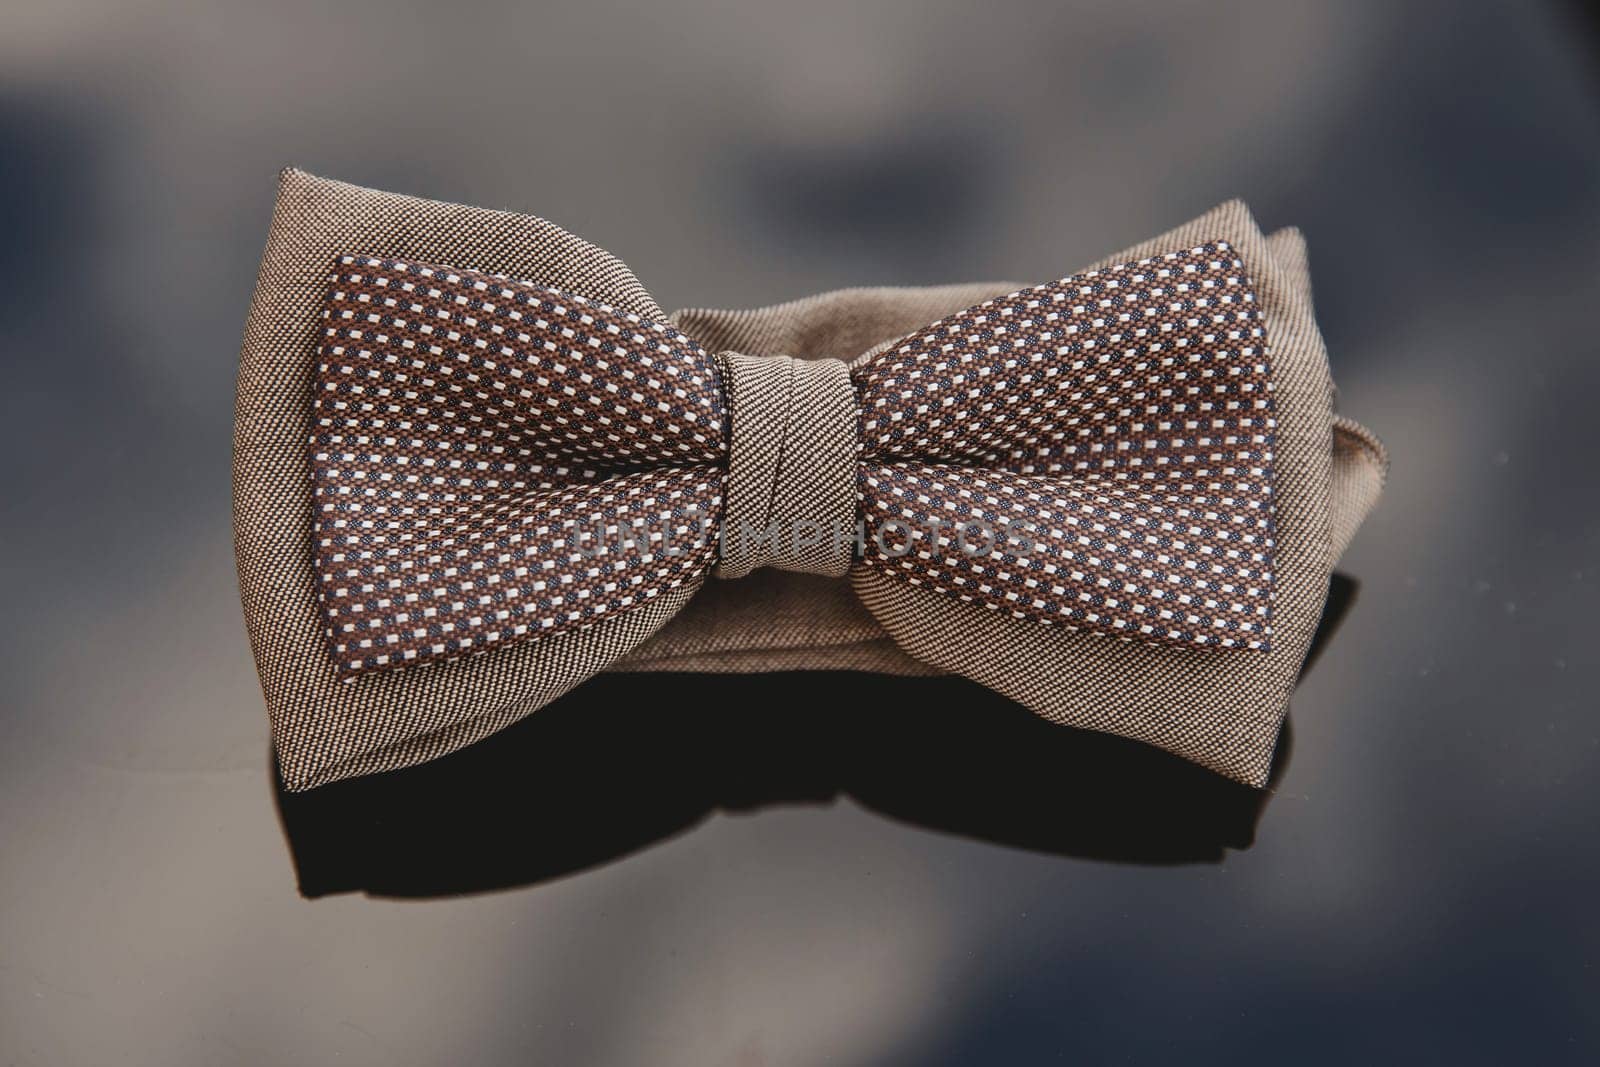 Men's bow tie on a mirror background. Close-up.